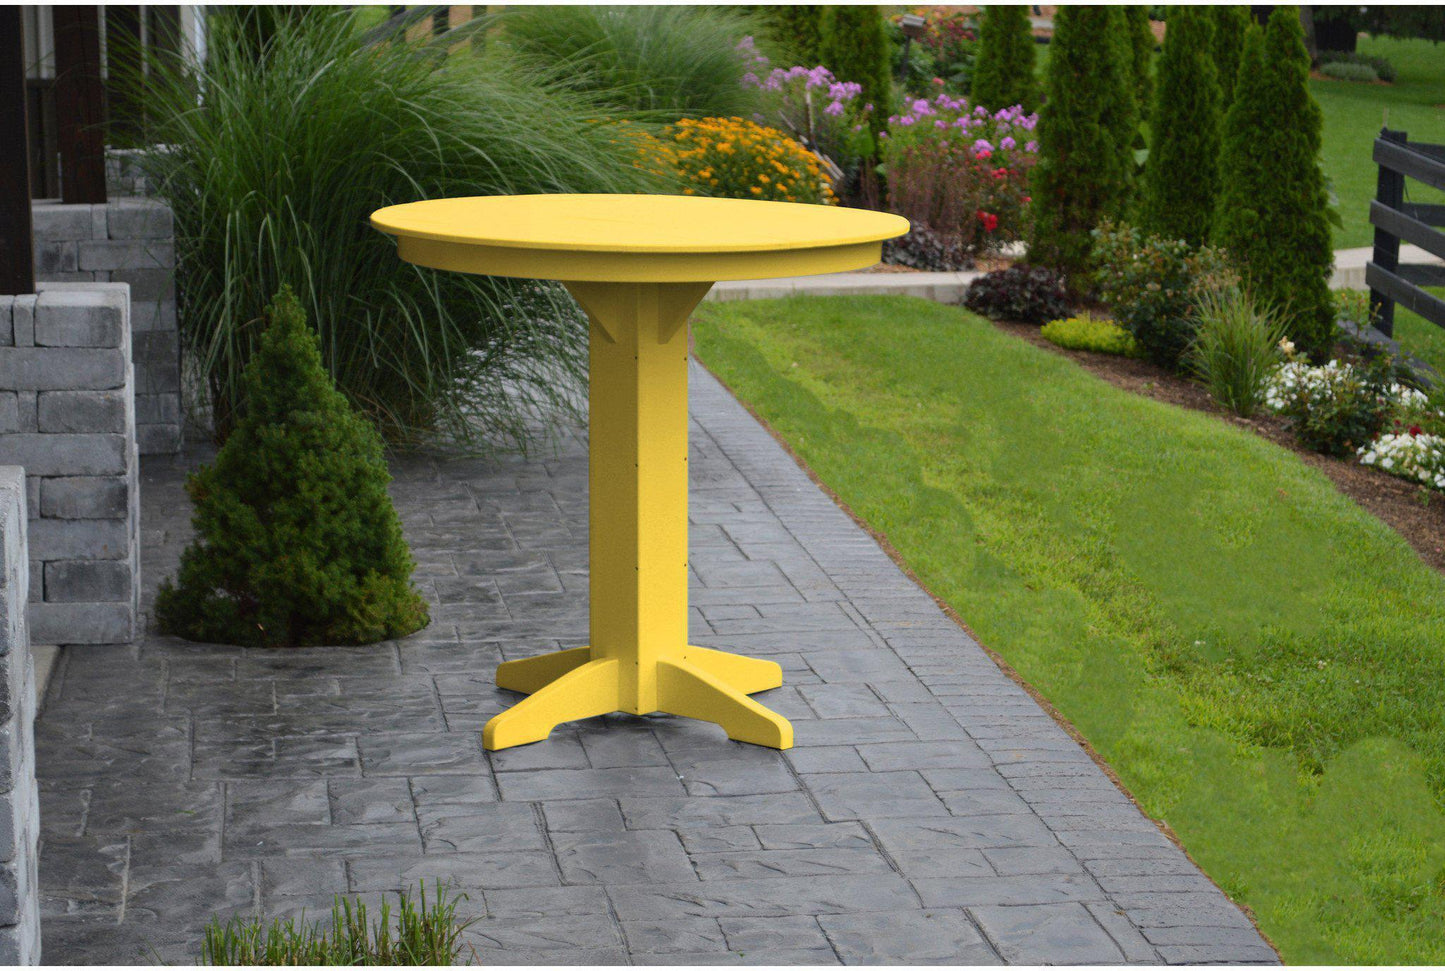 A&L Furniture Recycled Plastic 44" Round Bar Table - Lemon Yellow